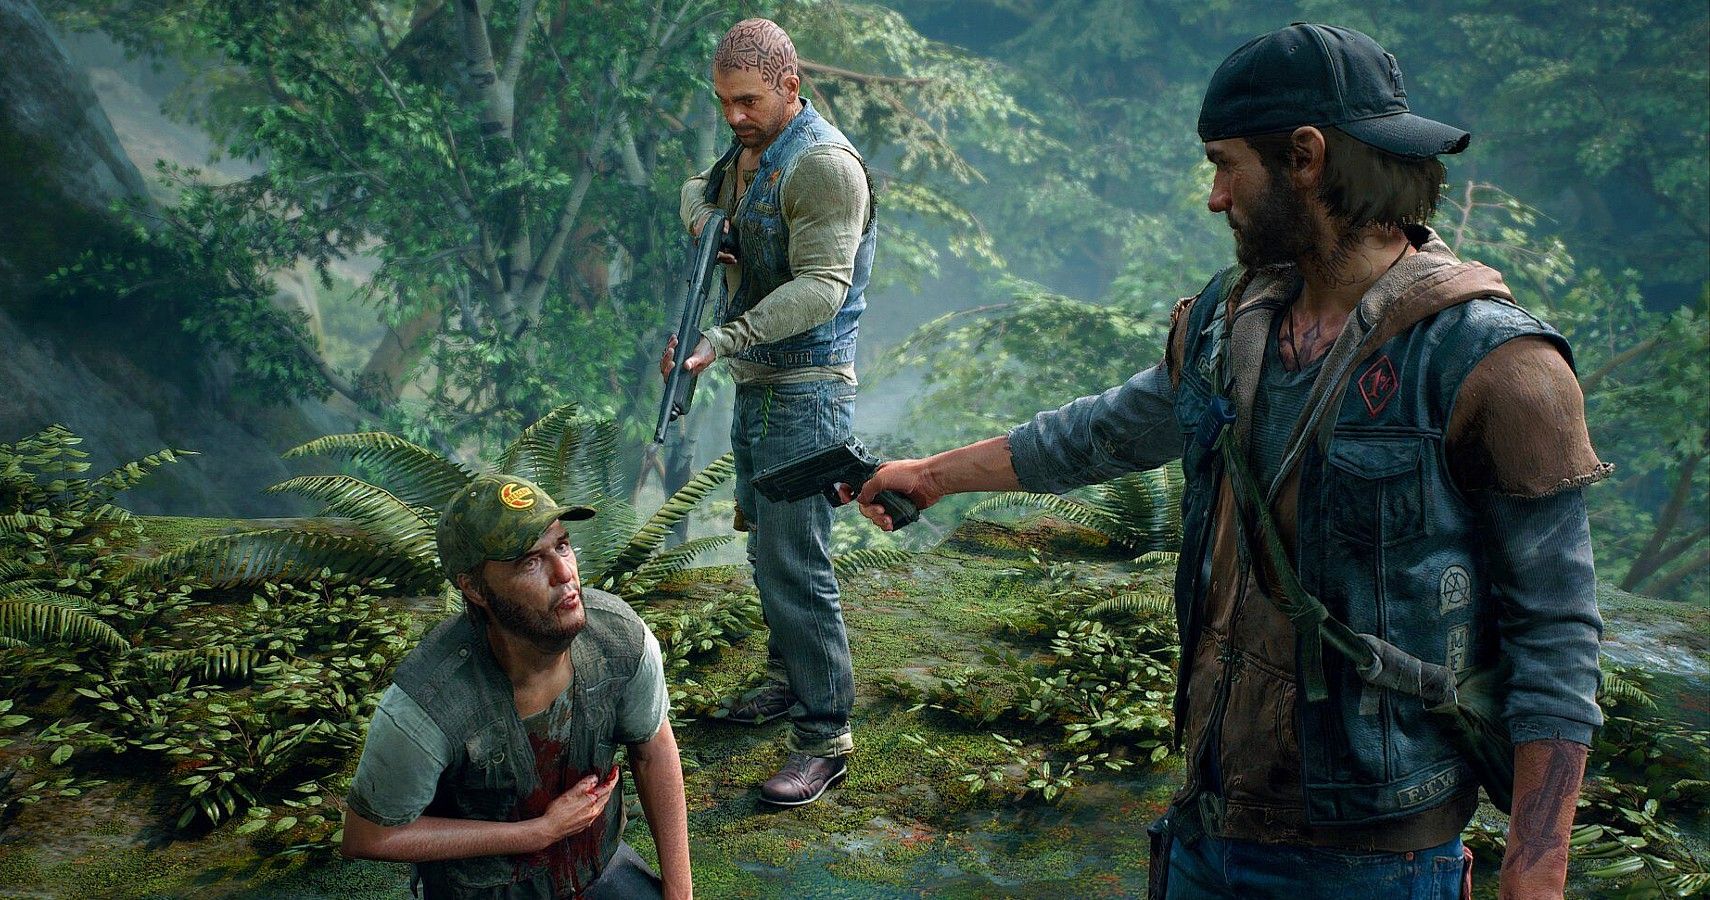 Days Gone' PC is Steam top seller, beating 'RE Village' and 'Mass